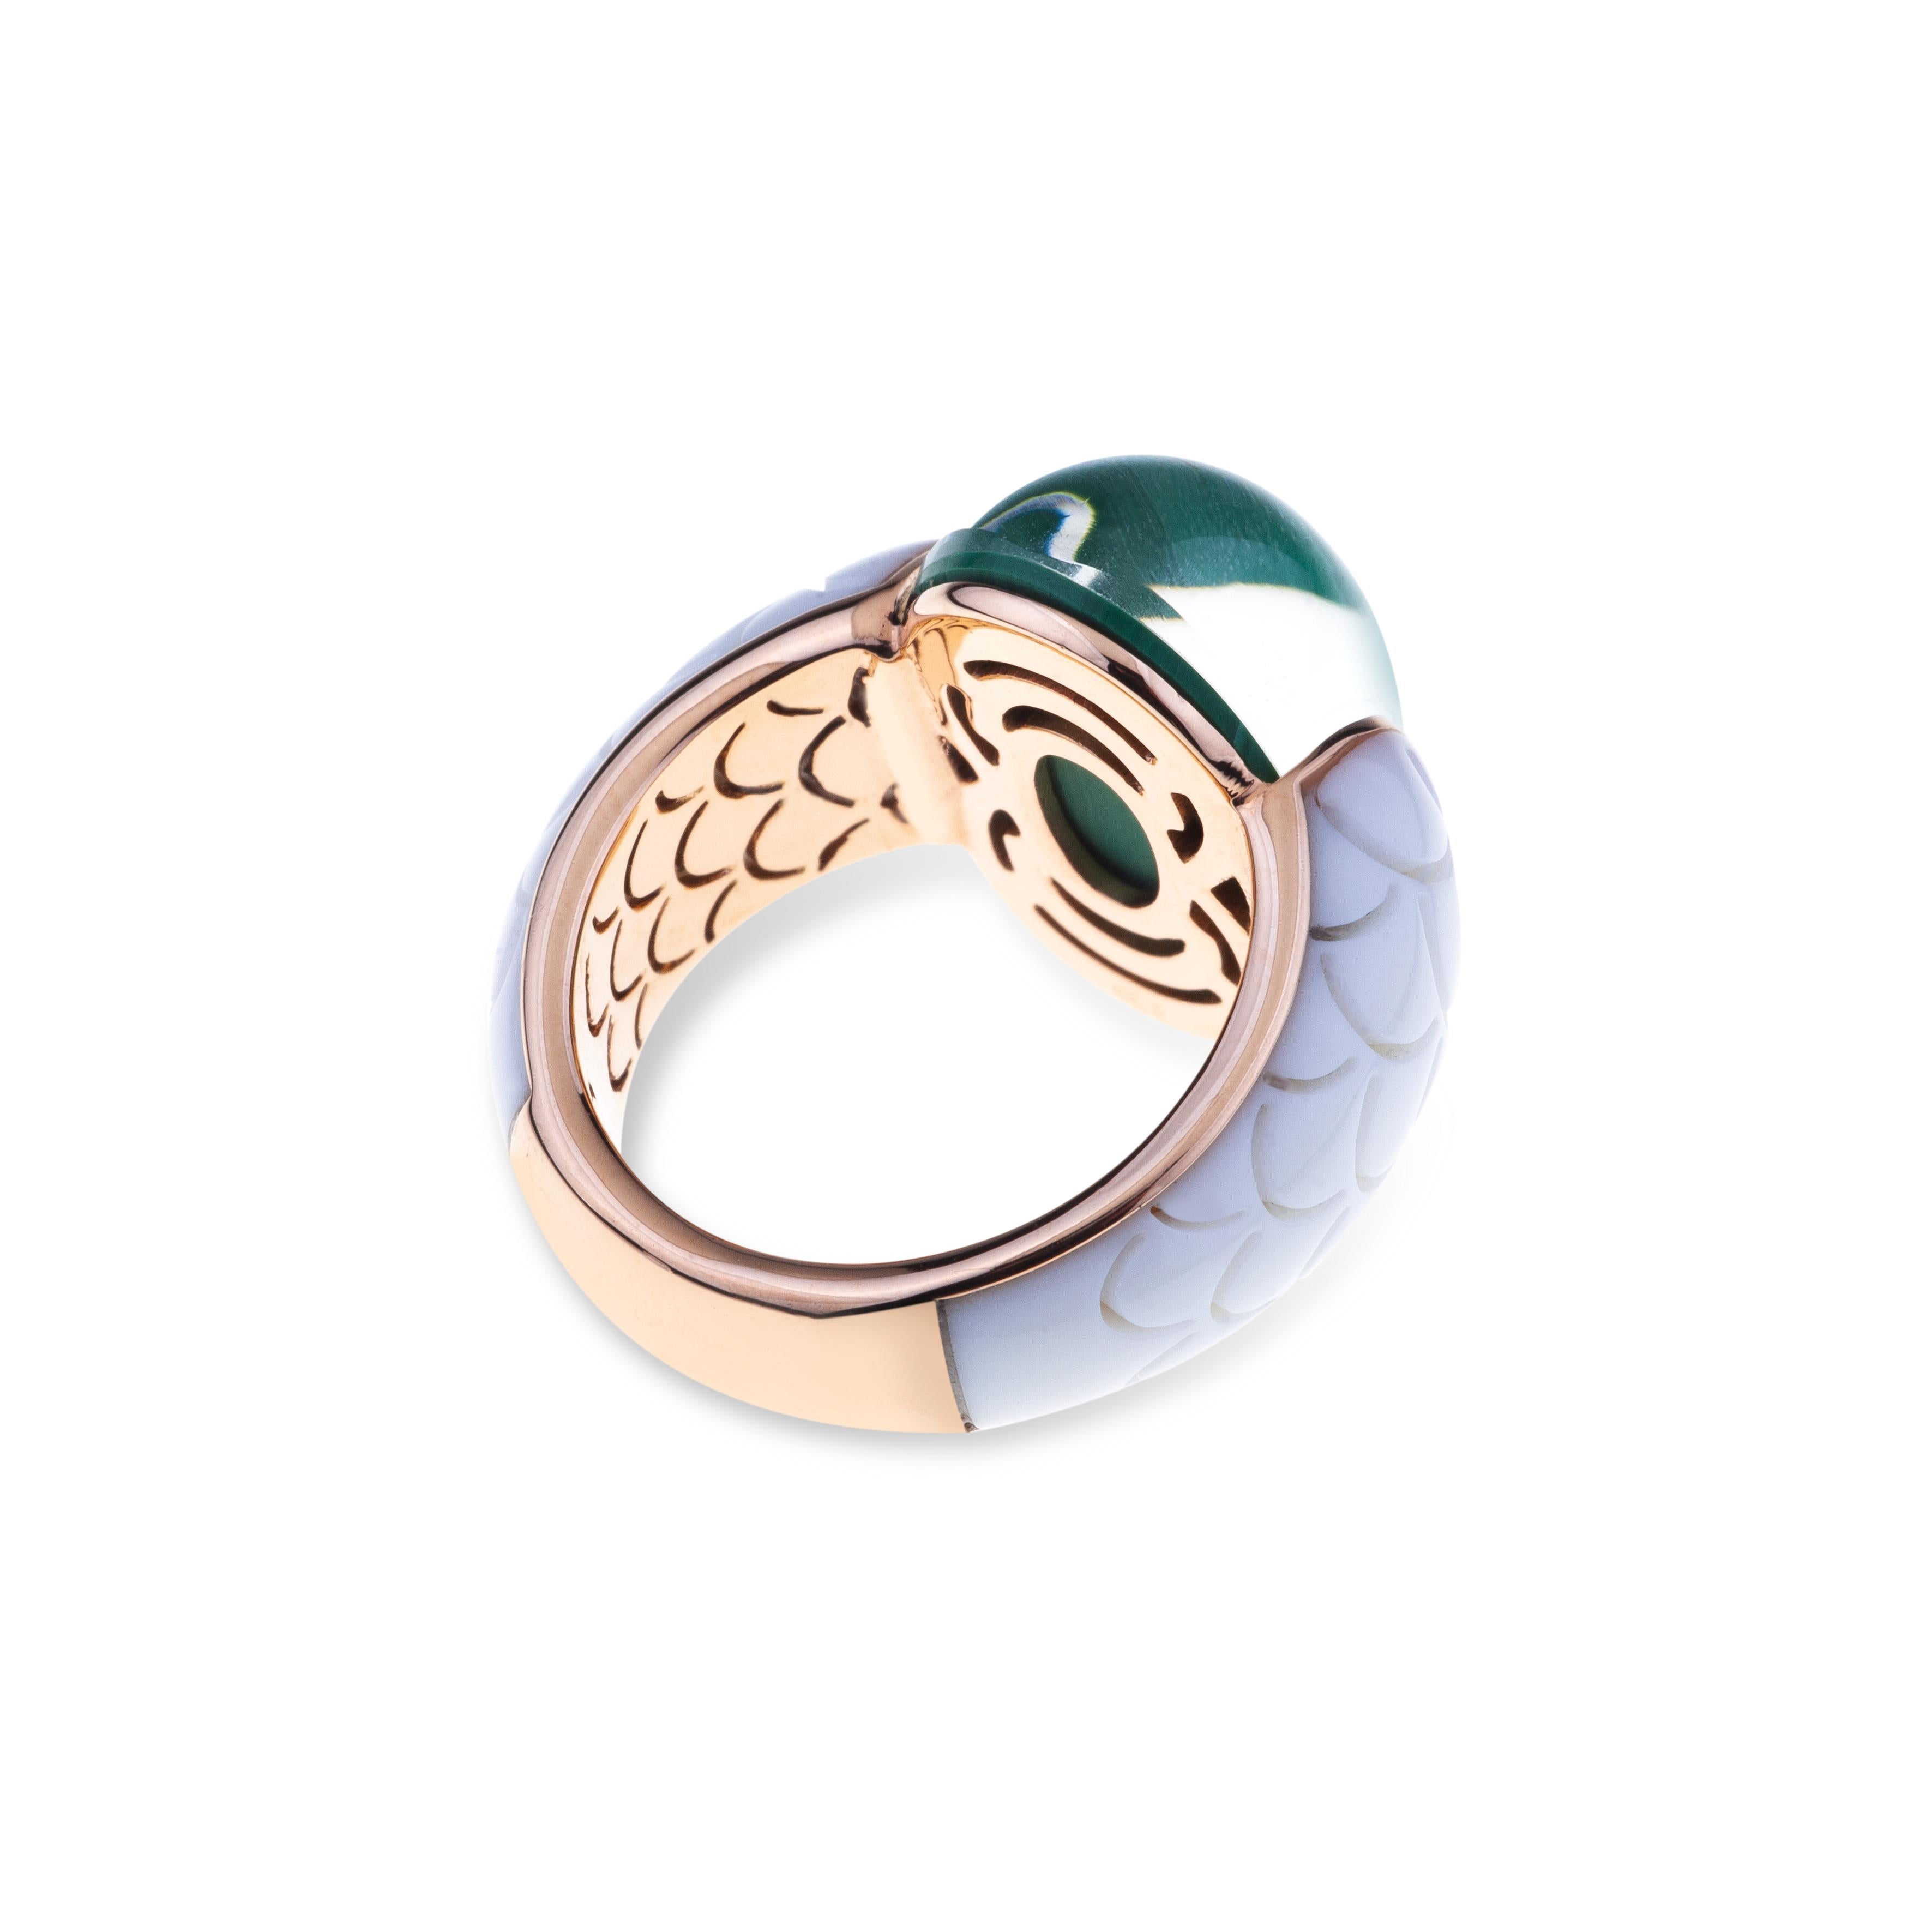 Women's Embrace, Ceramique and Rose Gold Ring with Cabochon Malachite For Sale